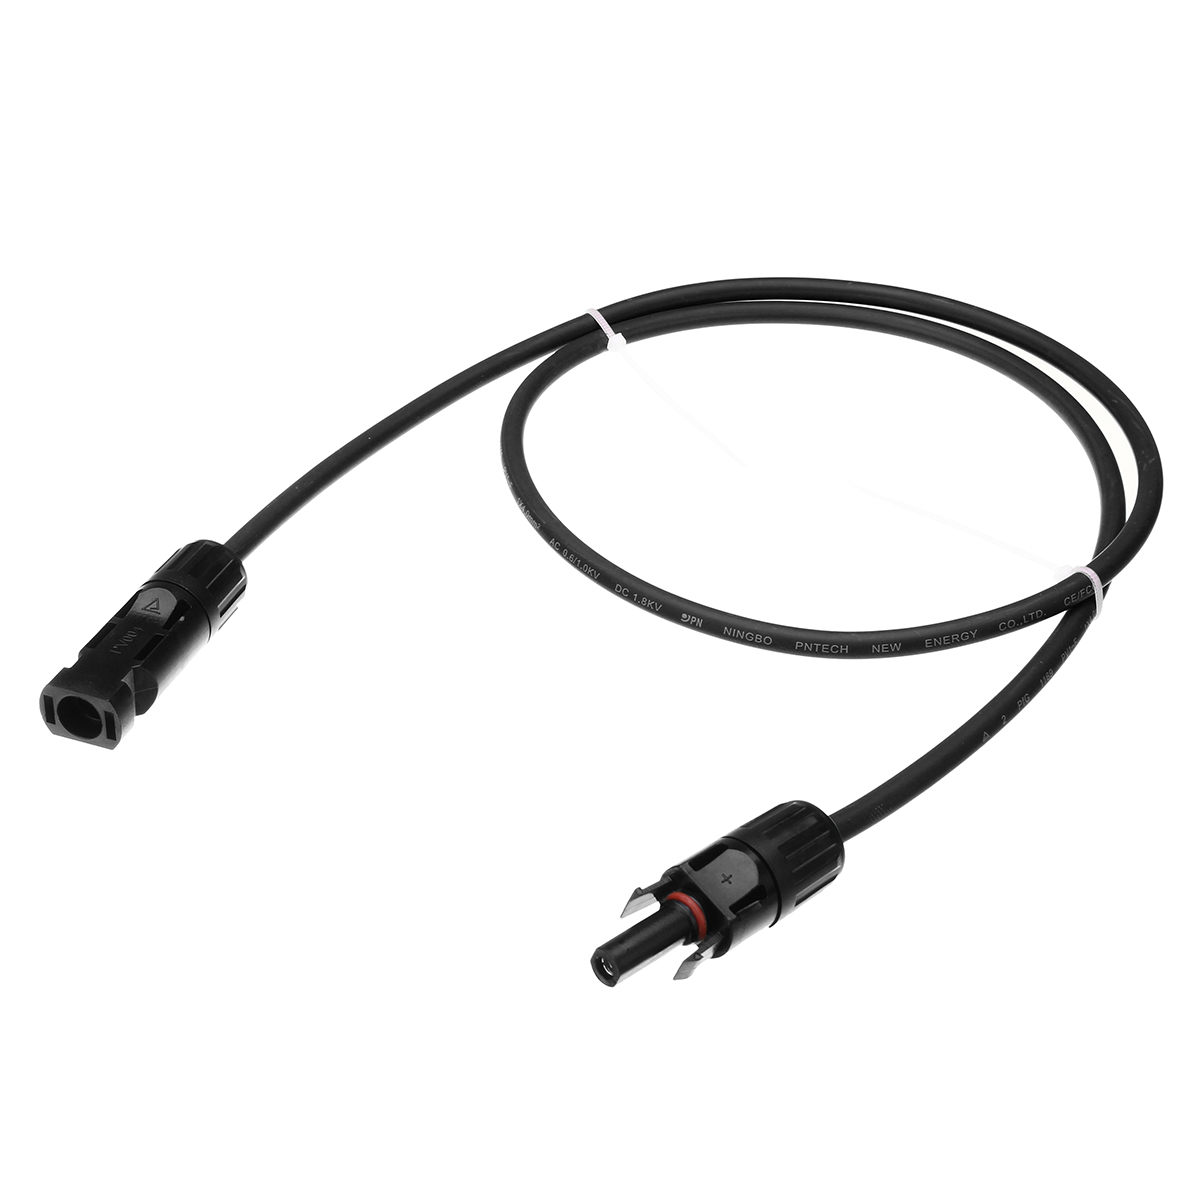 12-AWG-1-Meter-Solar-Panel-Extension-Cable-Wire-BlackRed-with-MC4-Connectors-1338748